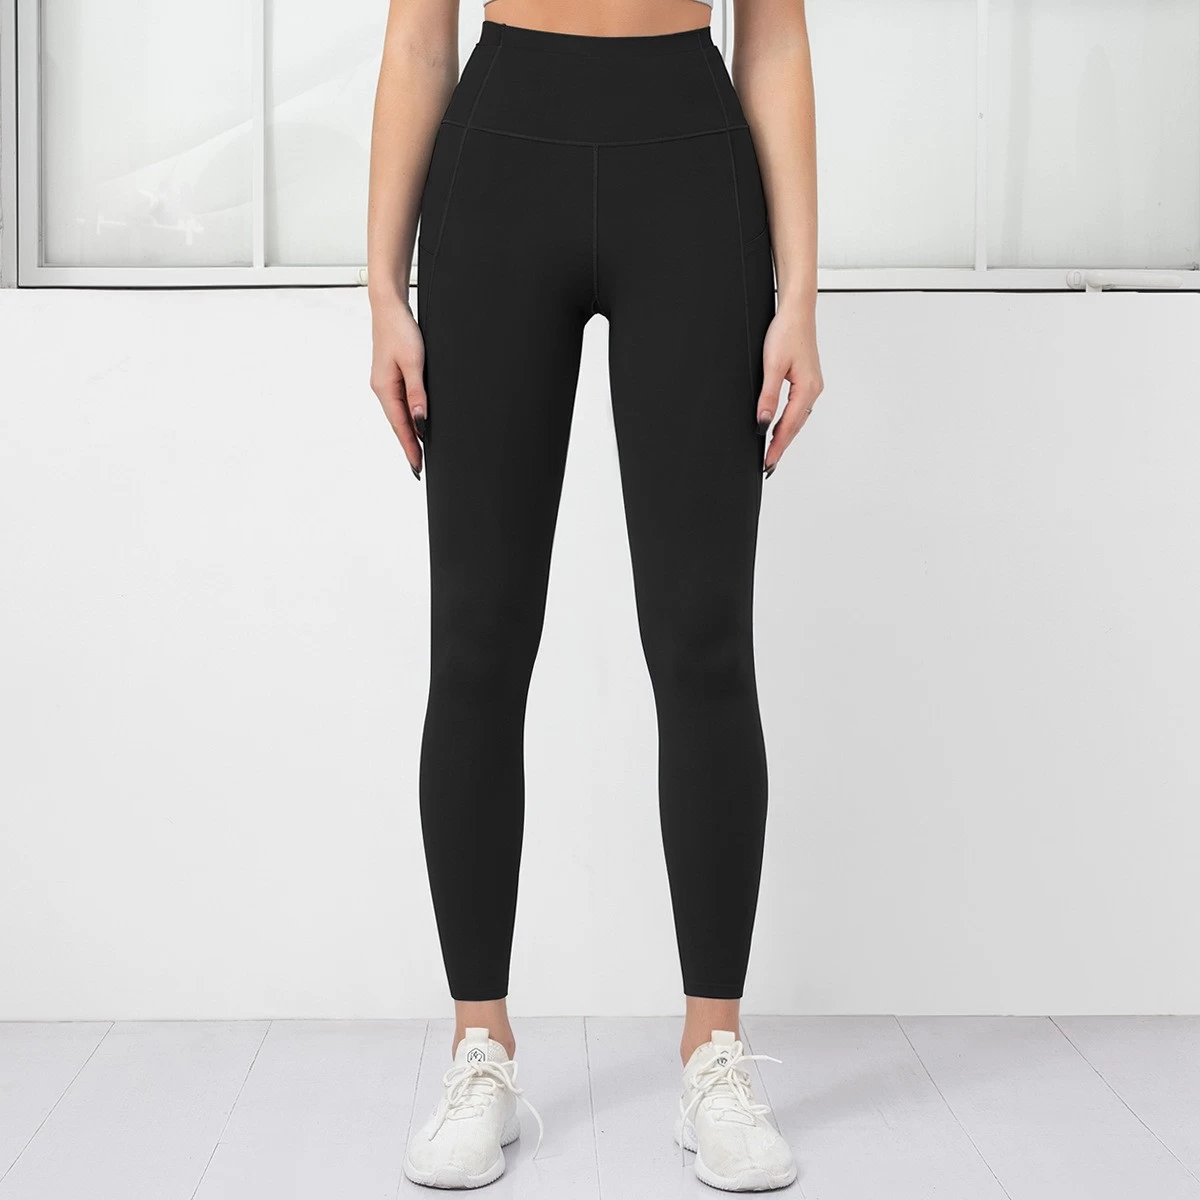 S-SHAPER Women's Casual High-quality fabrics Seamless Yoga Pants Compression Tights with Multiple Pockets High Waist Nudity Fitness Leggings